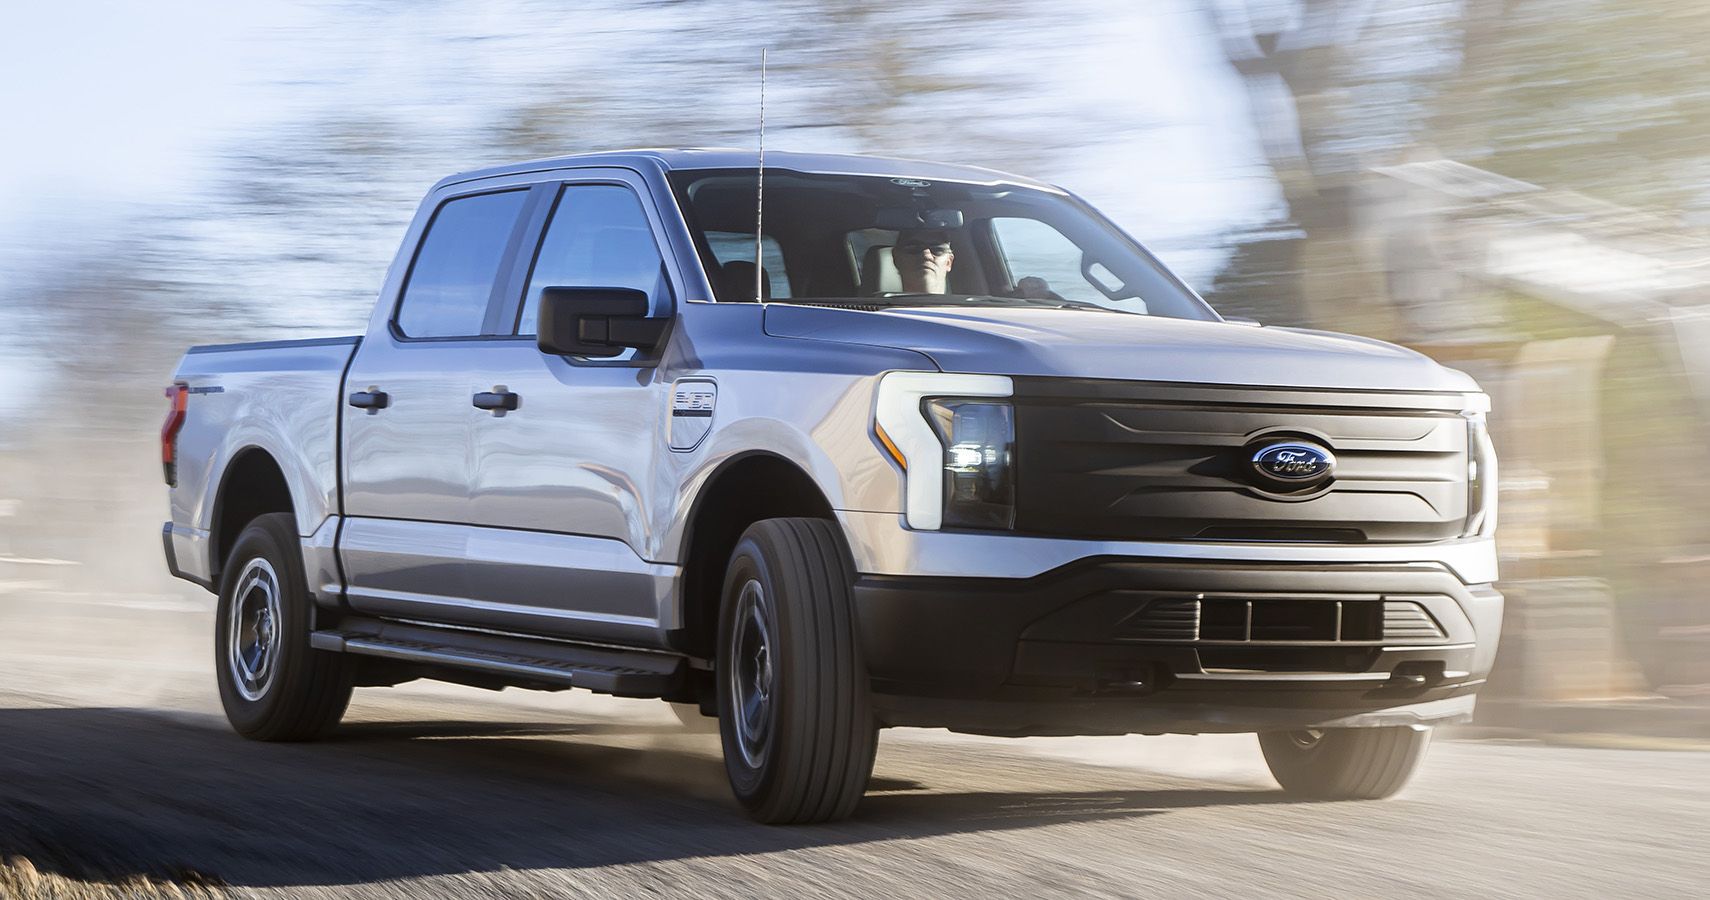 Ford F-150 Lightning Pro on the road